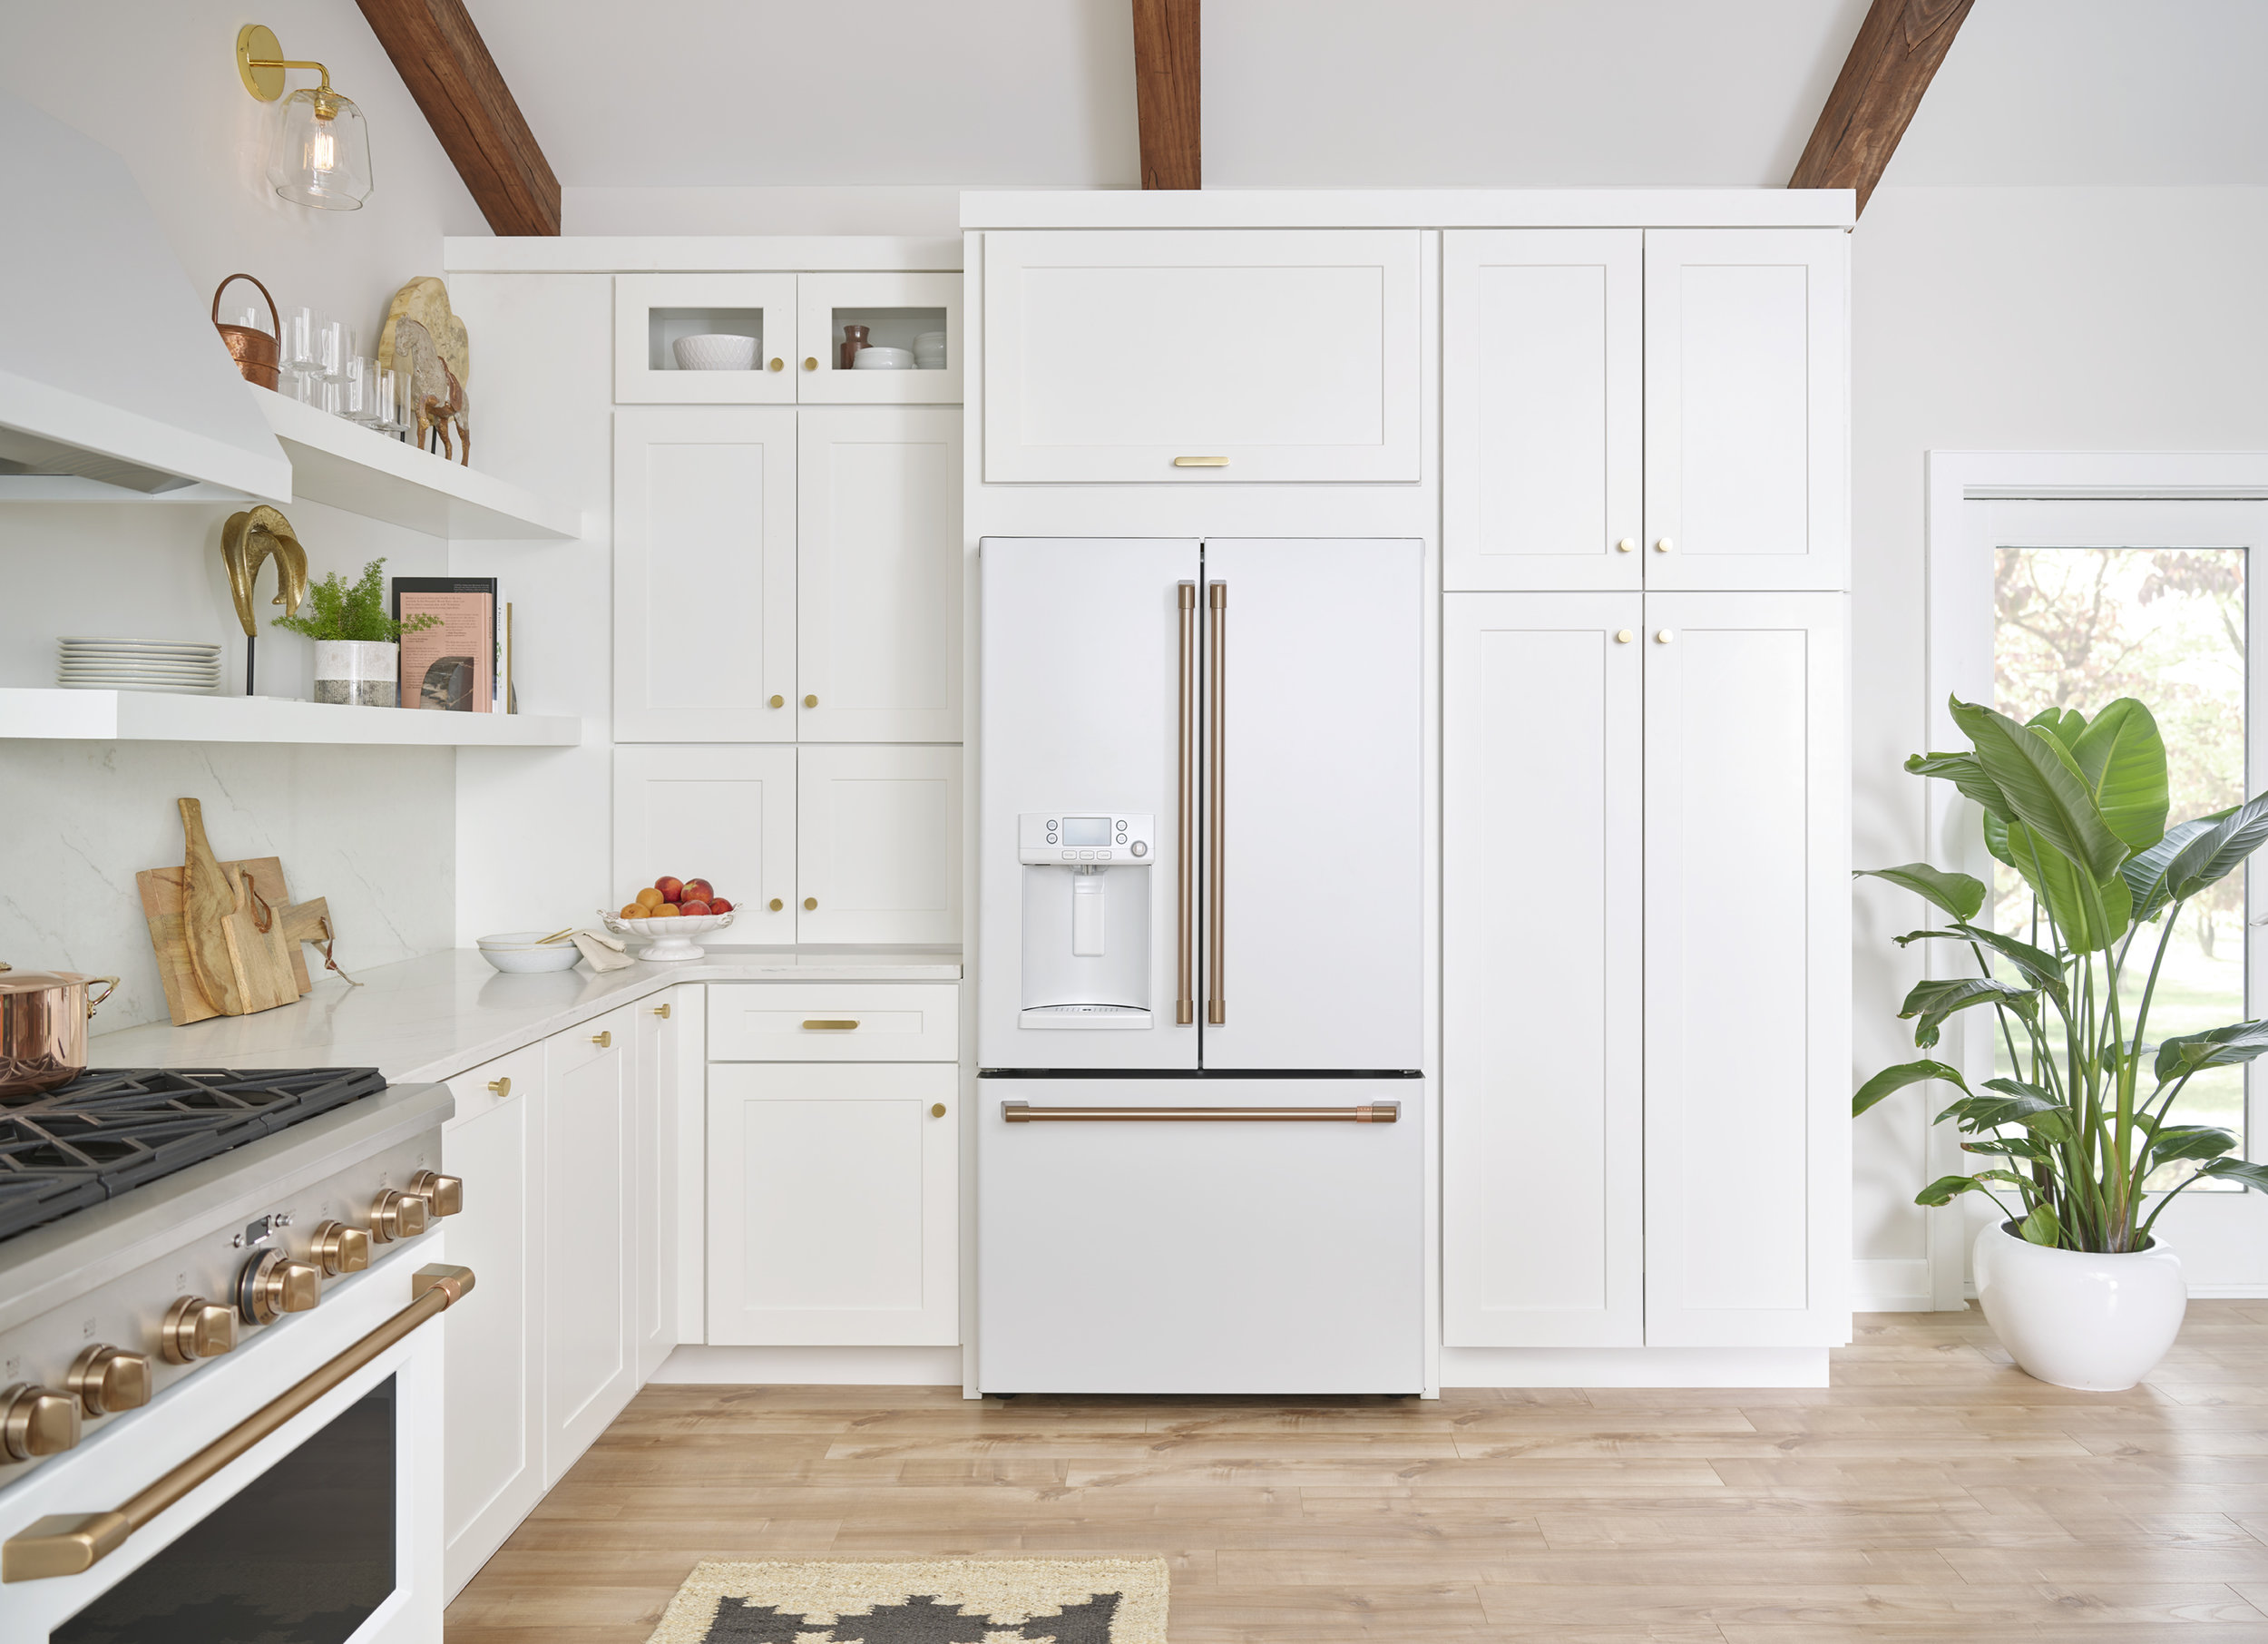 How to Style White Appliances and Decor